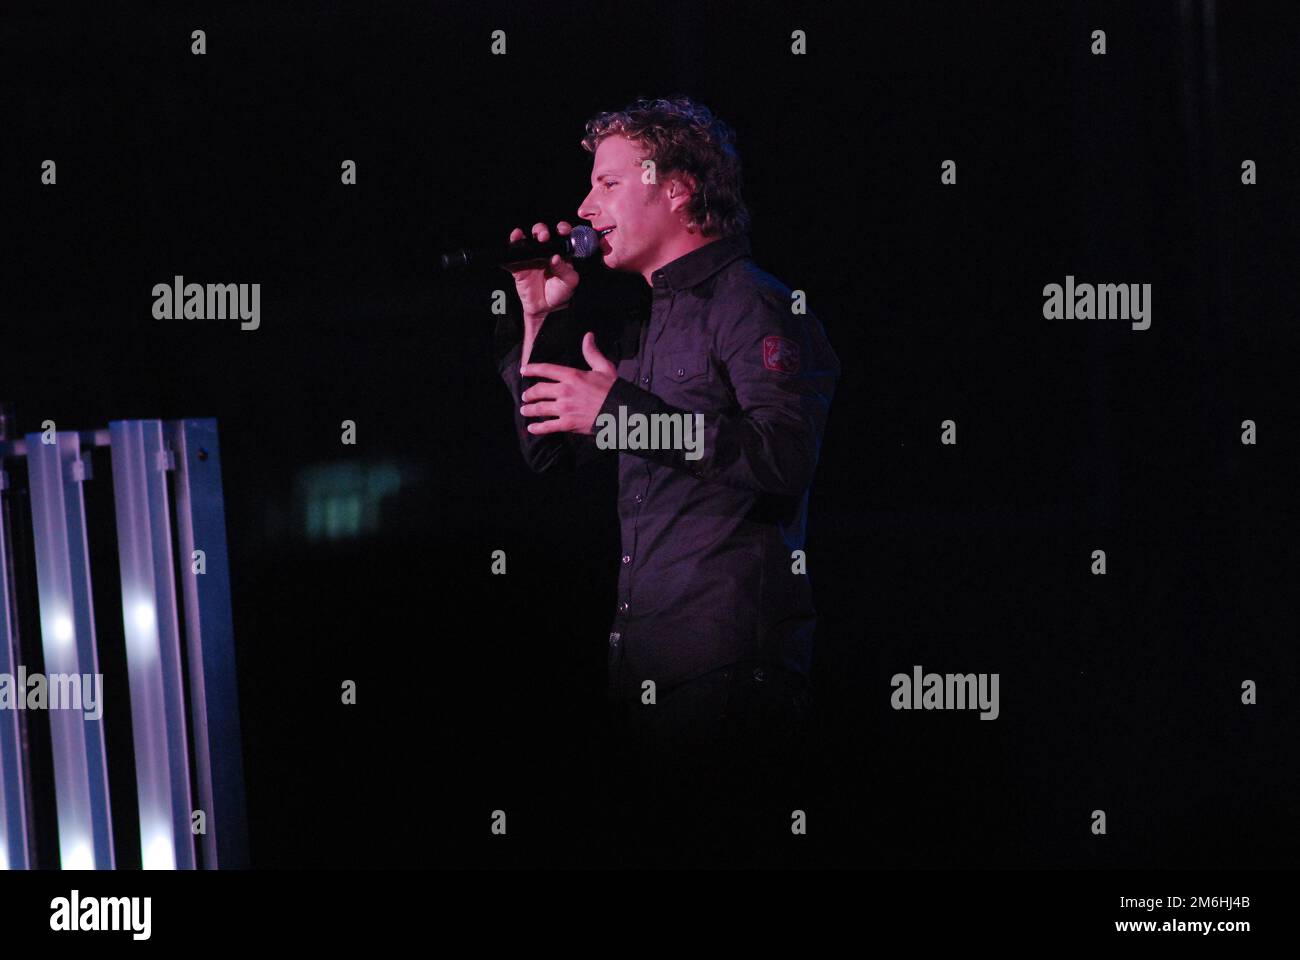 Country music star Dierks Bentley performing before a live audience at the University of Florida on 2/14/2008. Credit: Bill Ragan/Alamy Live News Stock Photo